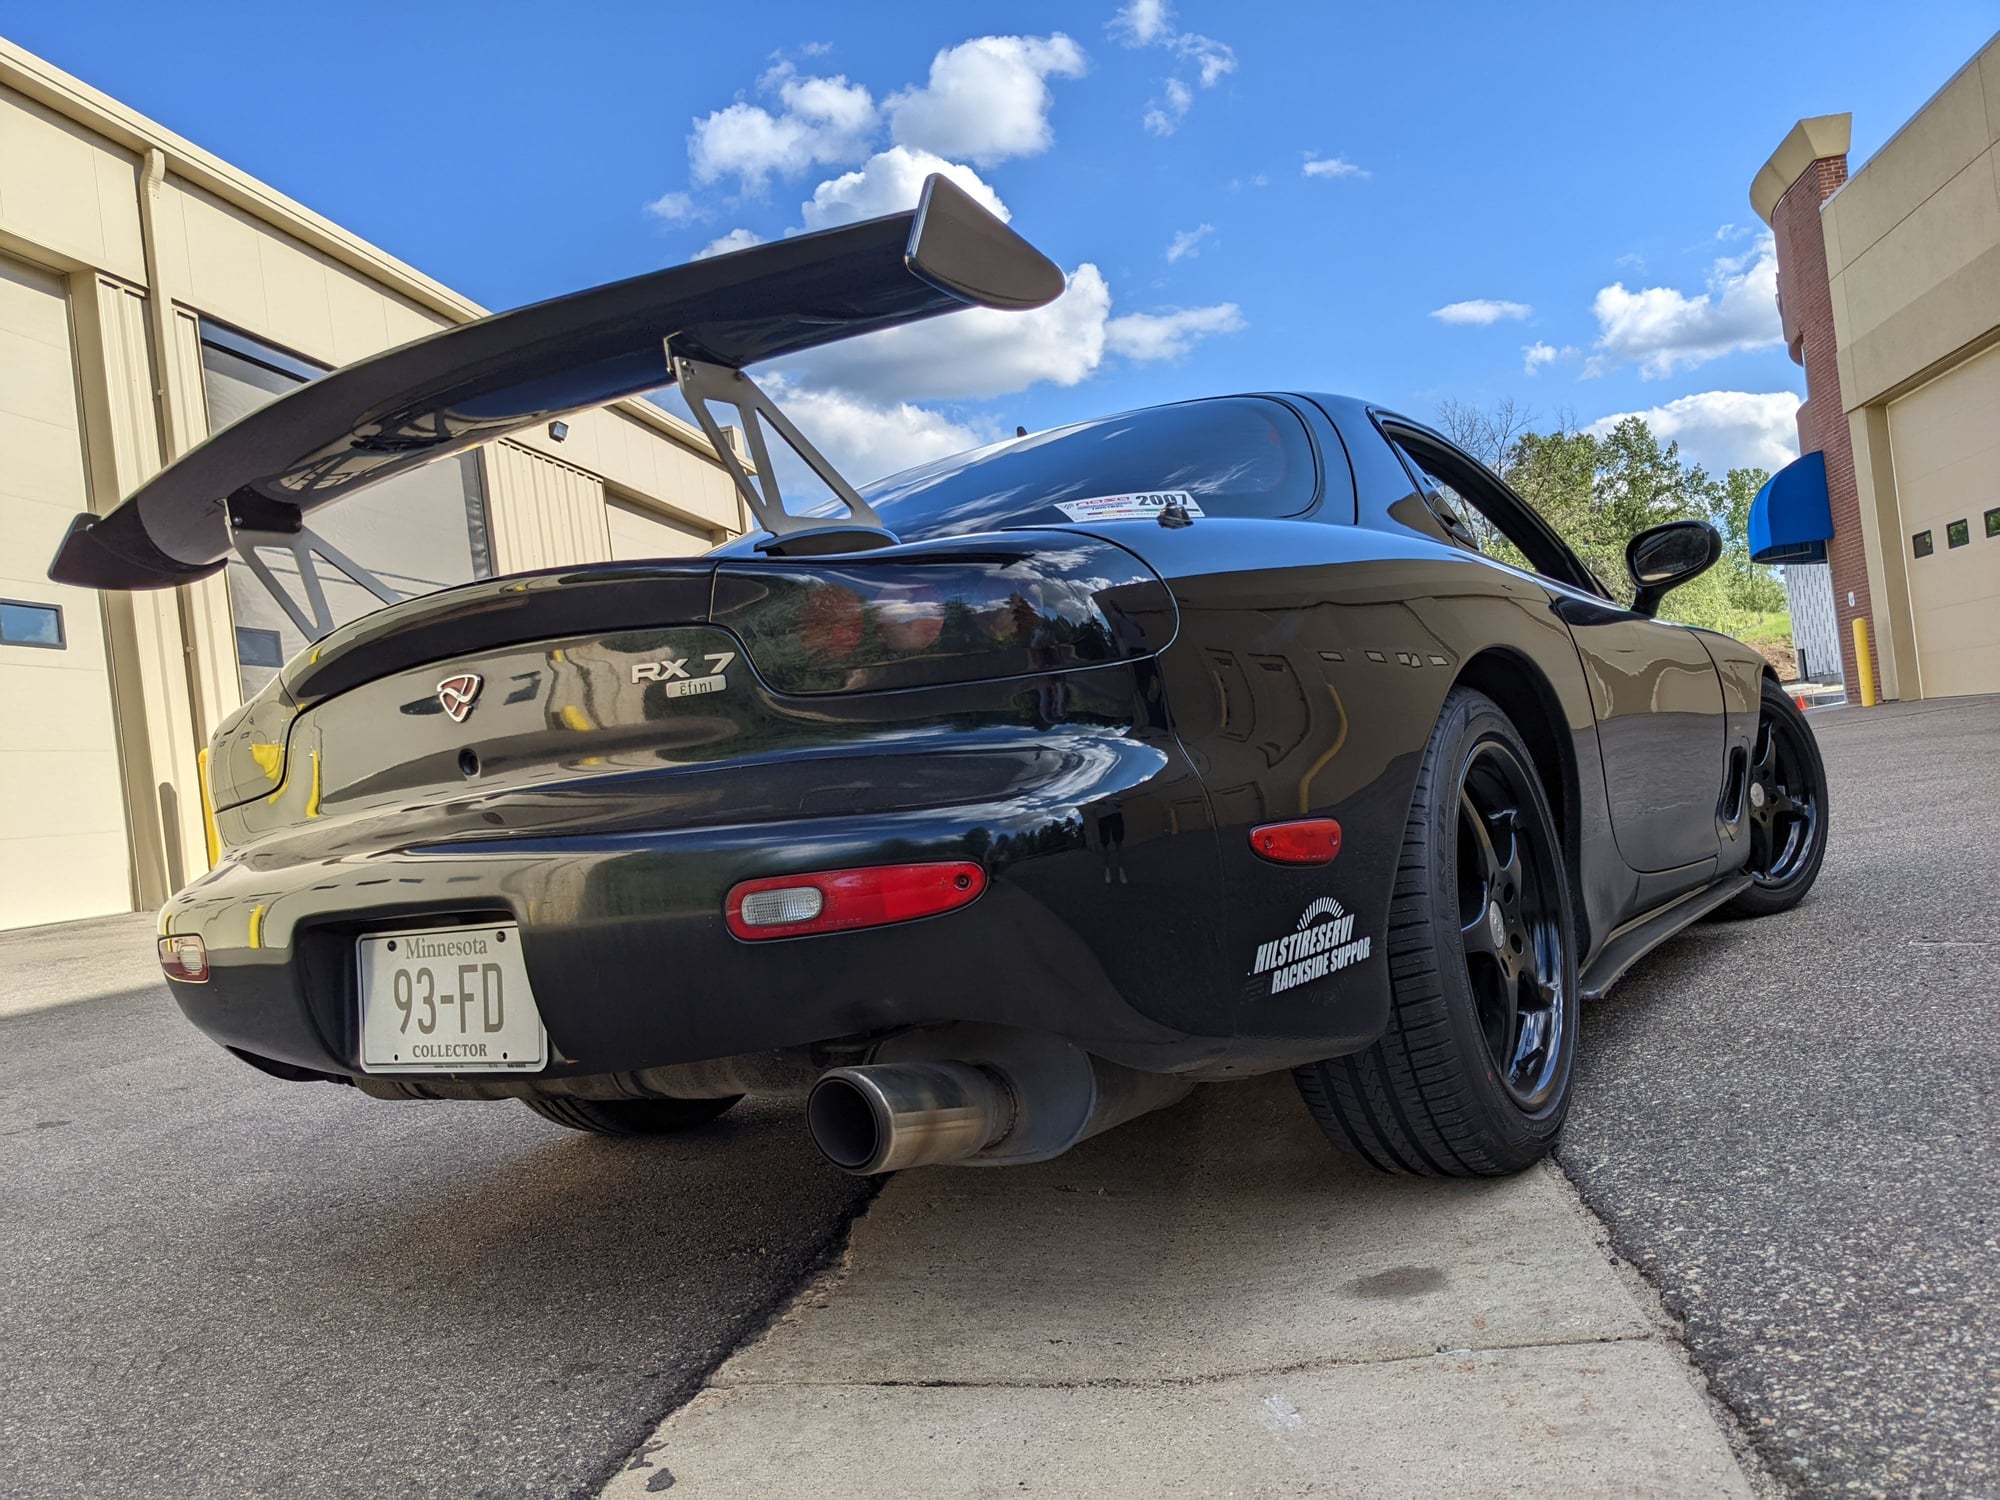 1993 Mazda RX-7 - 1993 Black FD - built for the Street/Track - Used - VIN JM1FD3312P0210372 - 108,500 Miles - Other - 2WD - Manual - Coupe - Black - Eden Prairie, MN 55346, United States